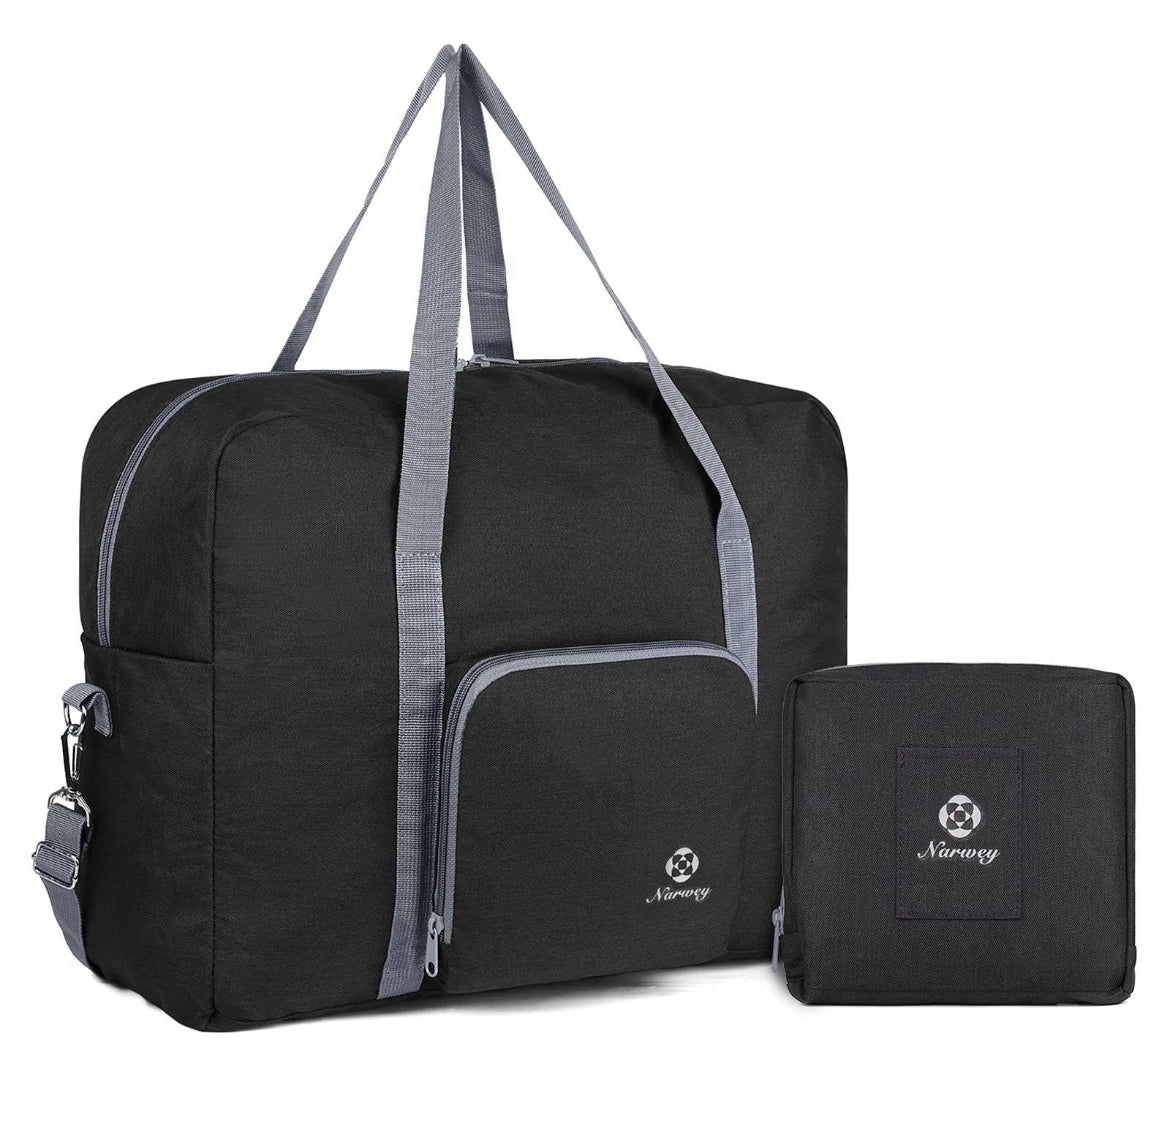 On Sale- Foldable/Packable Carry-On Duffle Bag